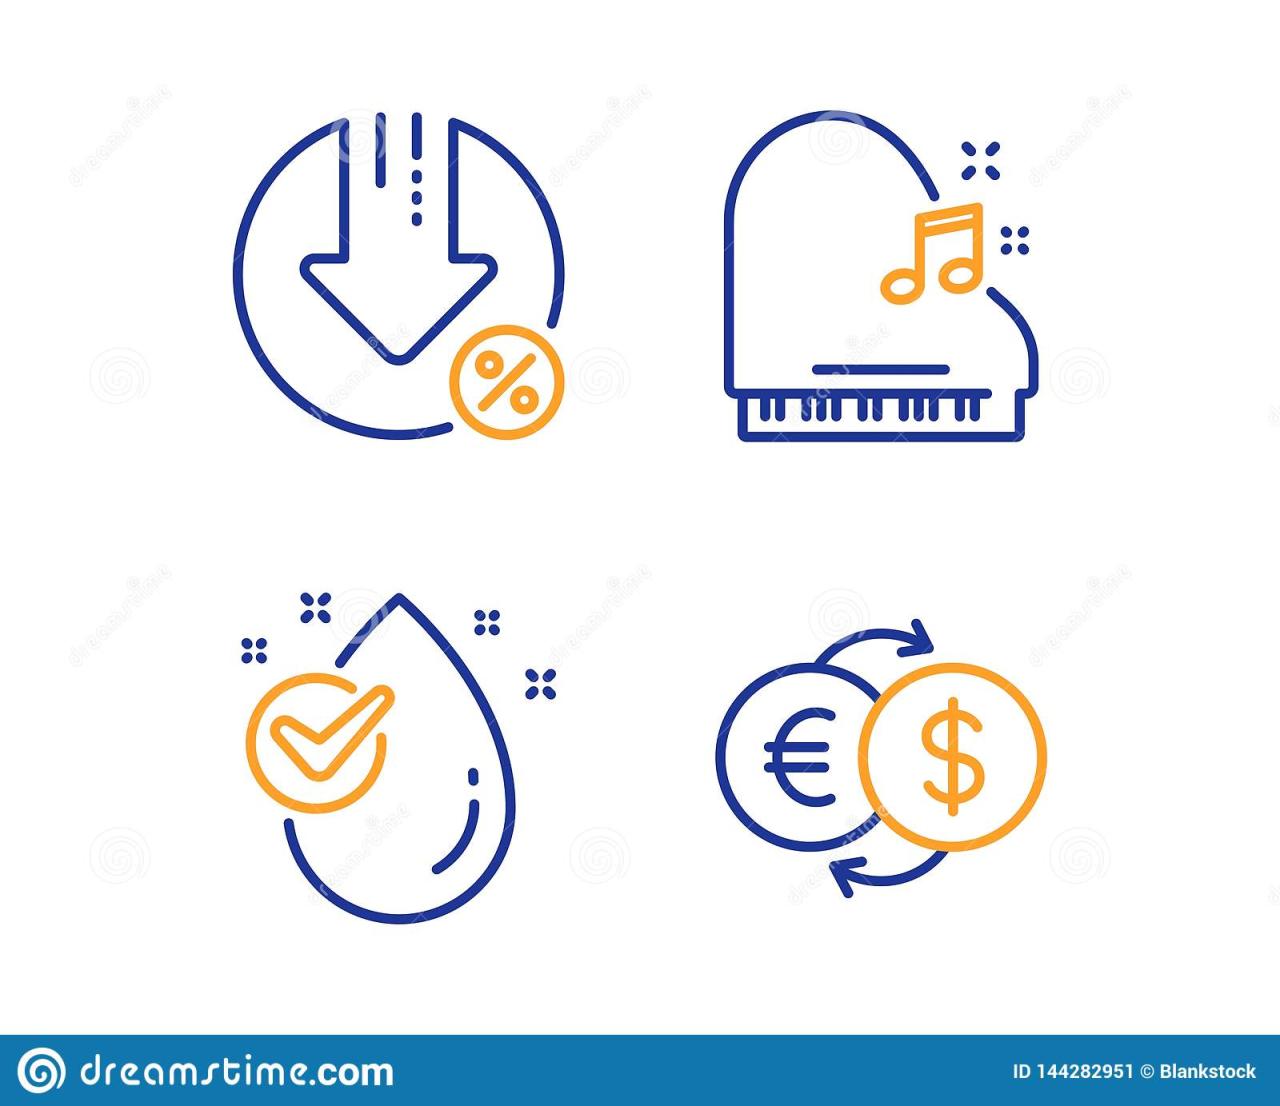 Piano, Loan Percent and Water Drop Icons Set. Money Exchange Sign